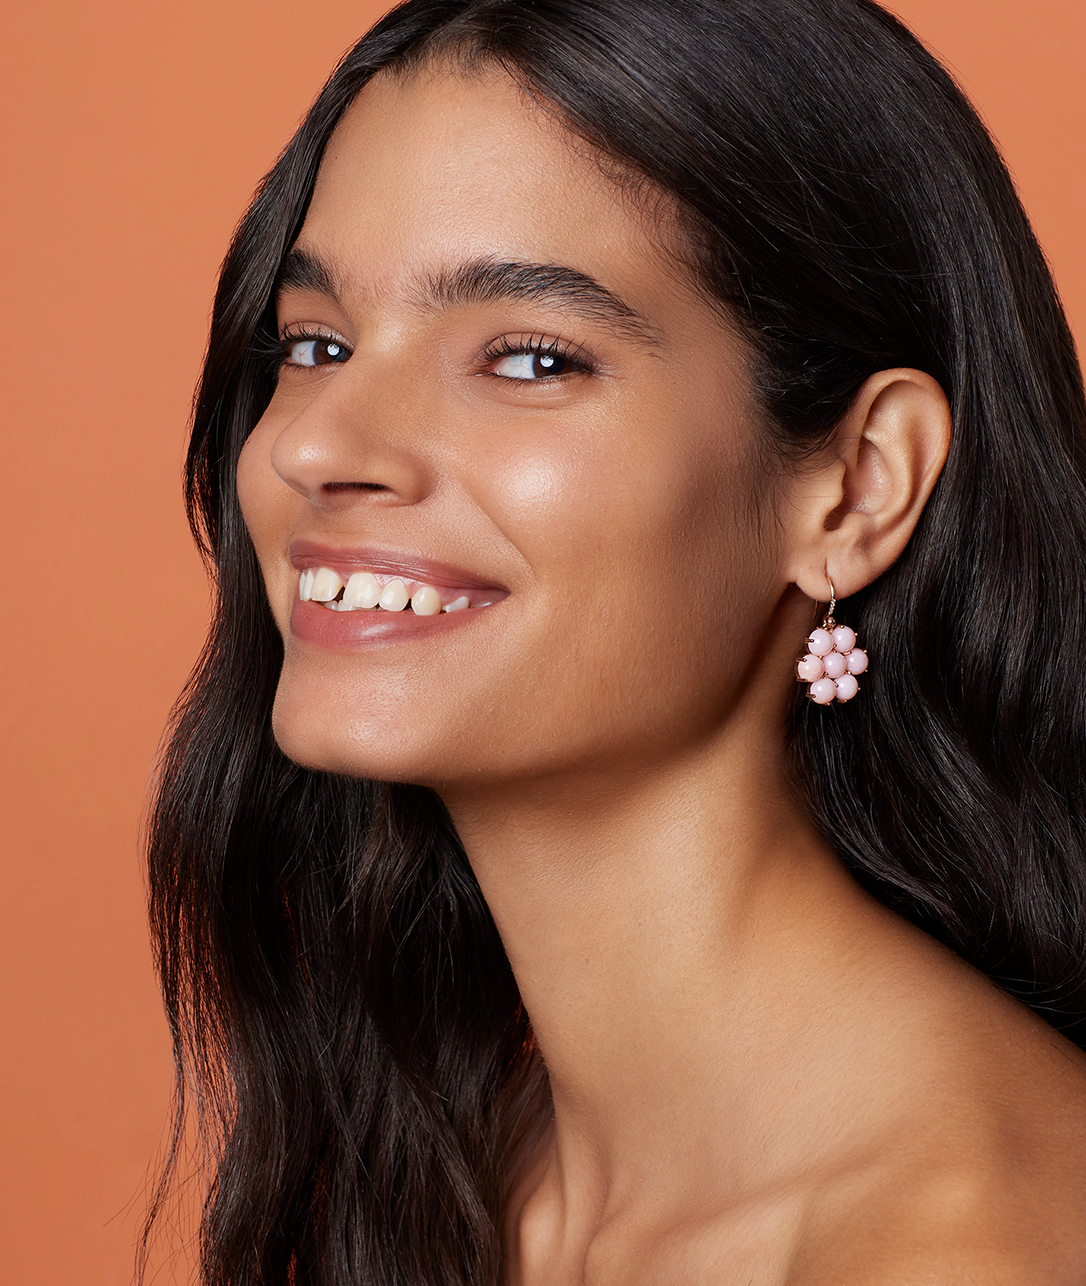                 Our Classic Floret Earrings come in our most favorite hue for a flower: cotton candy pink opal.SHOP CLASSIC FLORET EARRINGS            